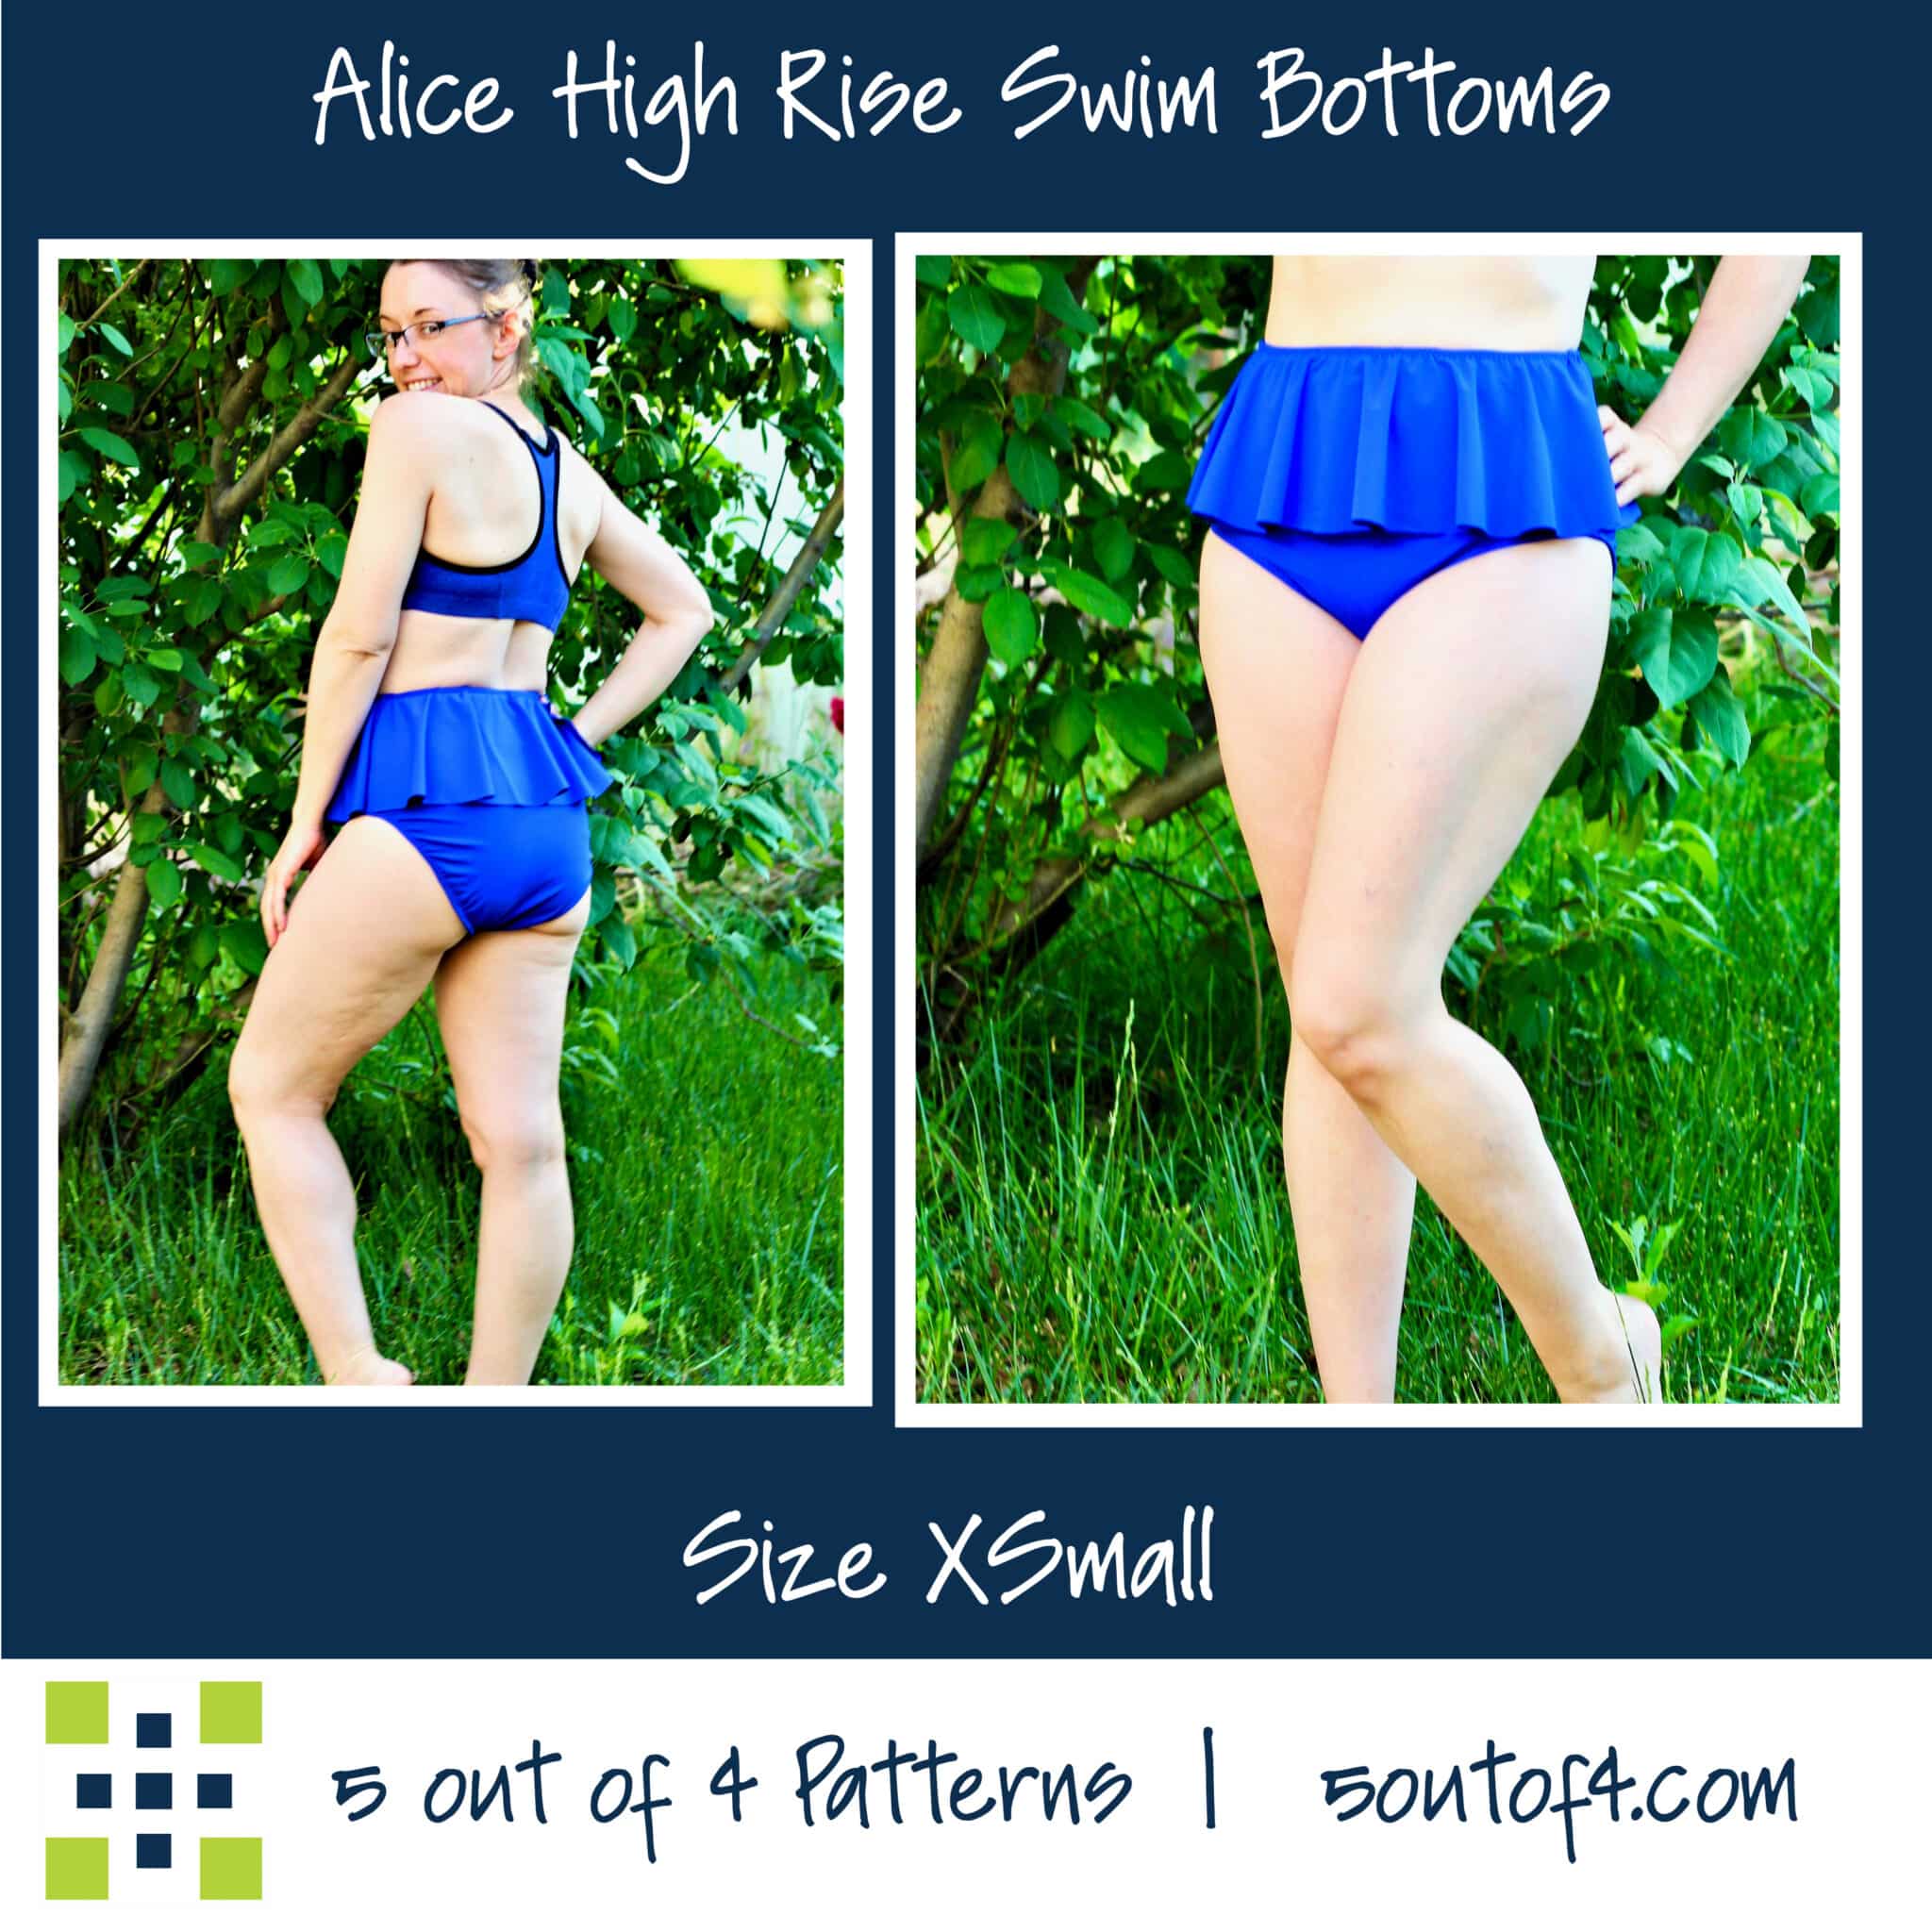 Alice and Ruth Swim Bottoms Bundle - 5 out of 4 Patterns